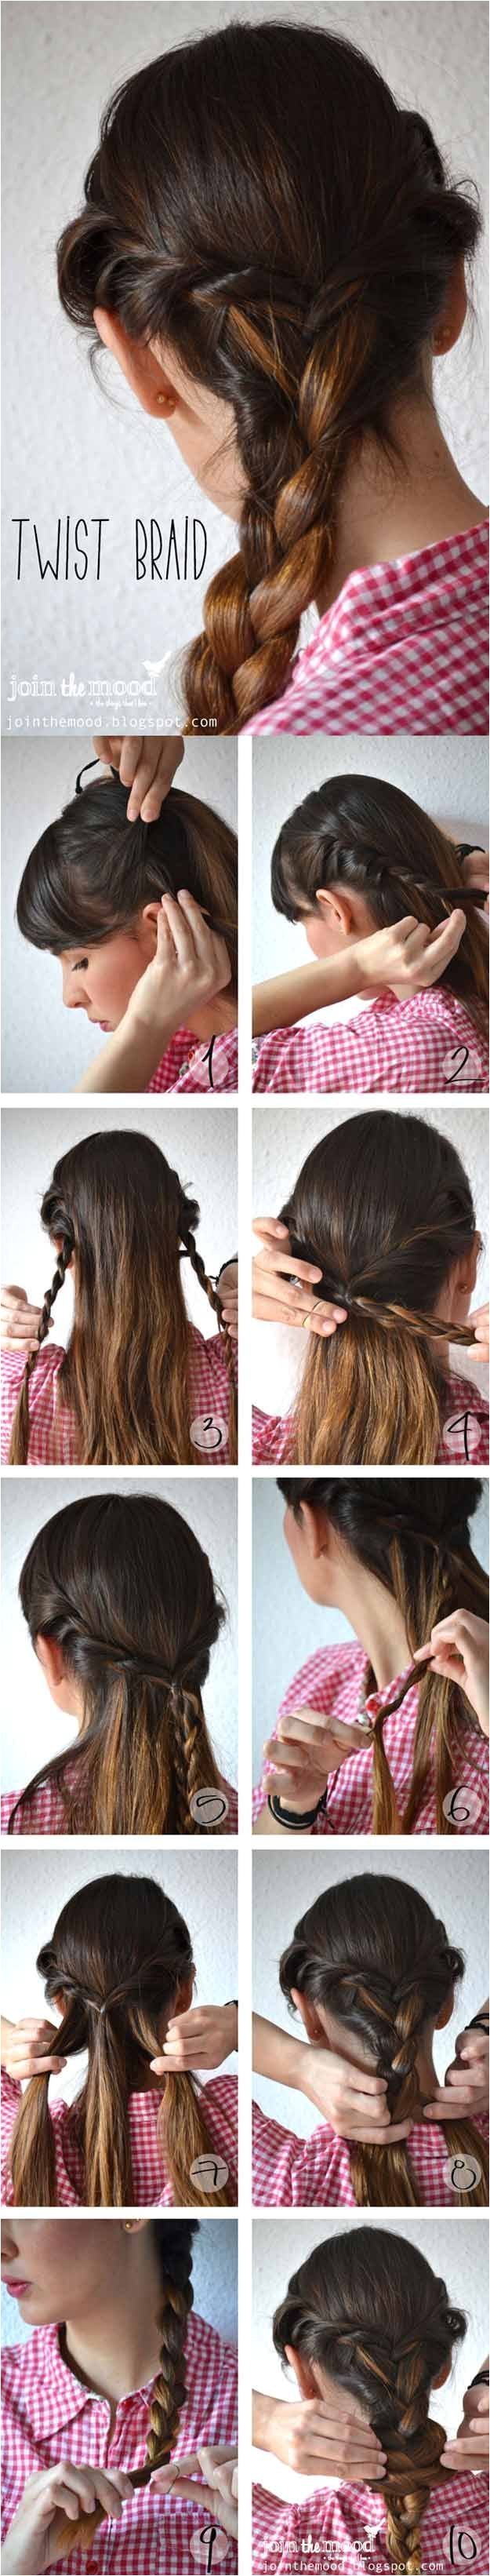 Best Hairstyles For Teens Cute Hairstyles for School Easy And Cute Haircuts And Hairstyles For Teens And Girls Cute Ideas Like Braids And Tutorials And